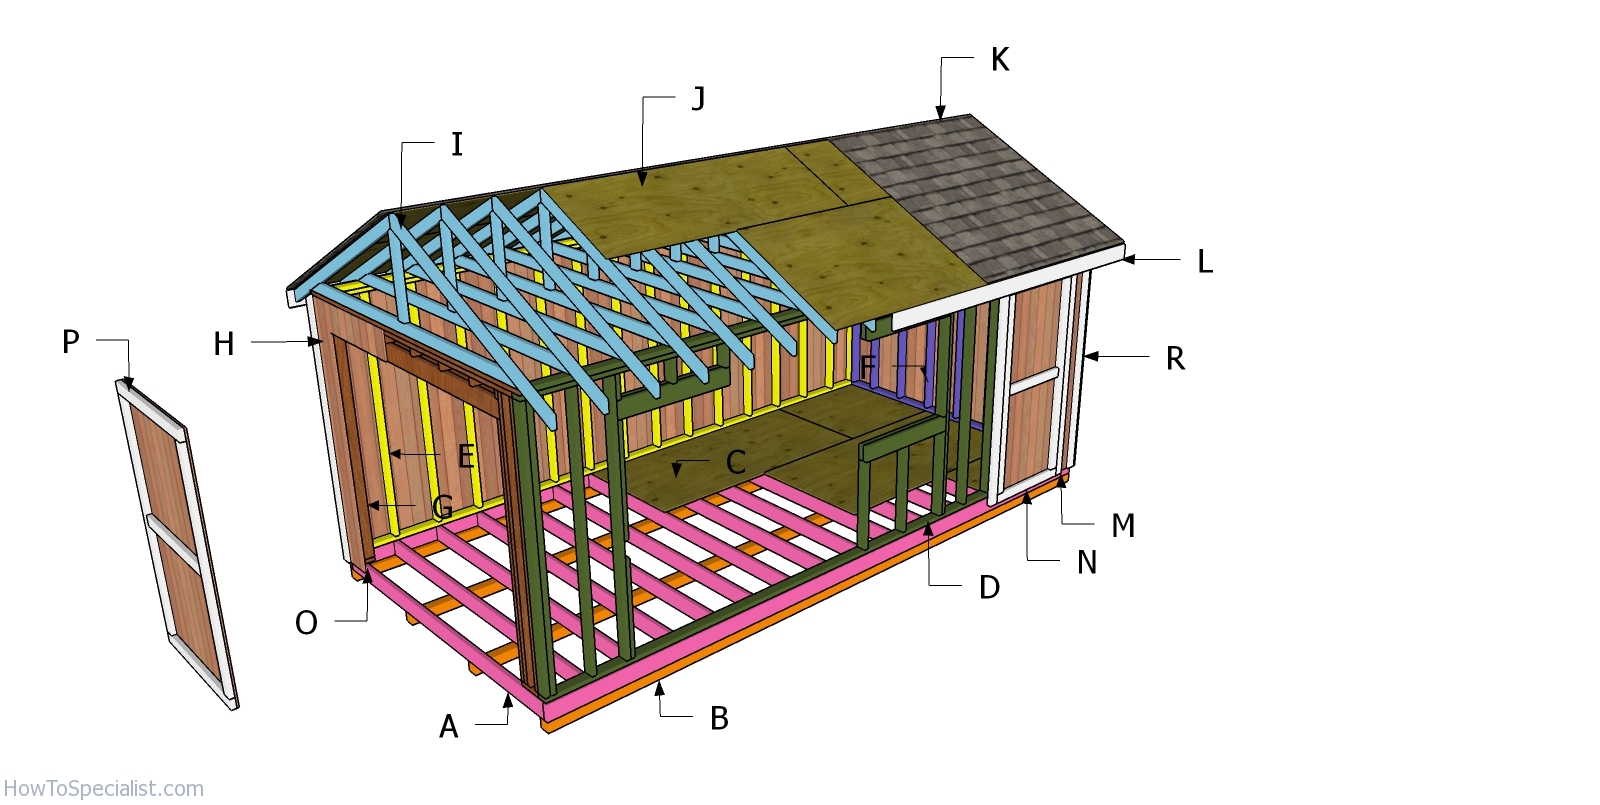 10x20 Gable Shed Plans - Free PDF Download | HowToSpecialist - How to ...